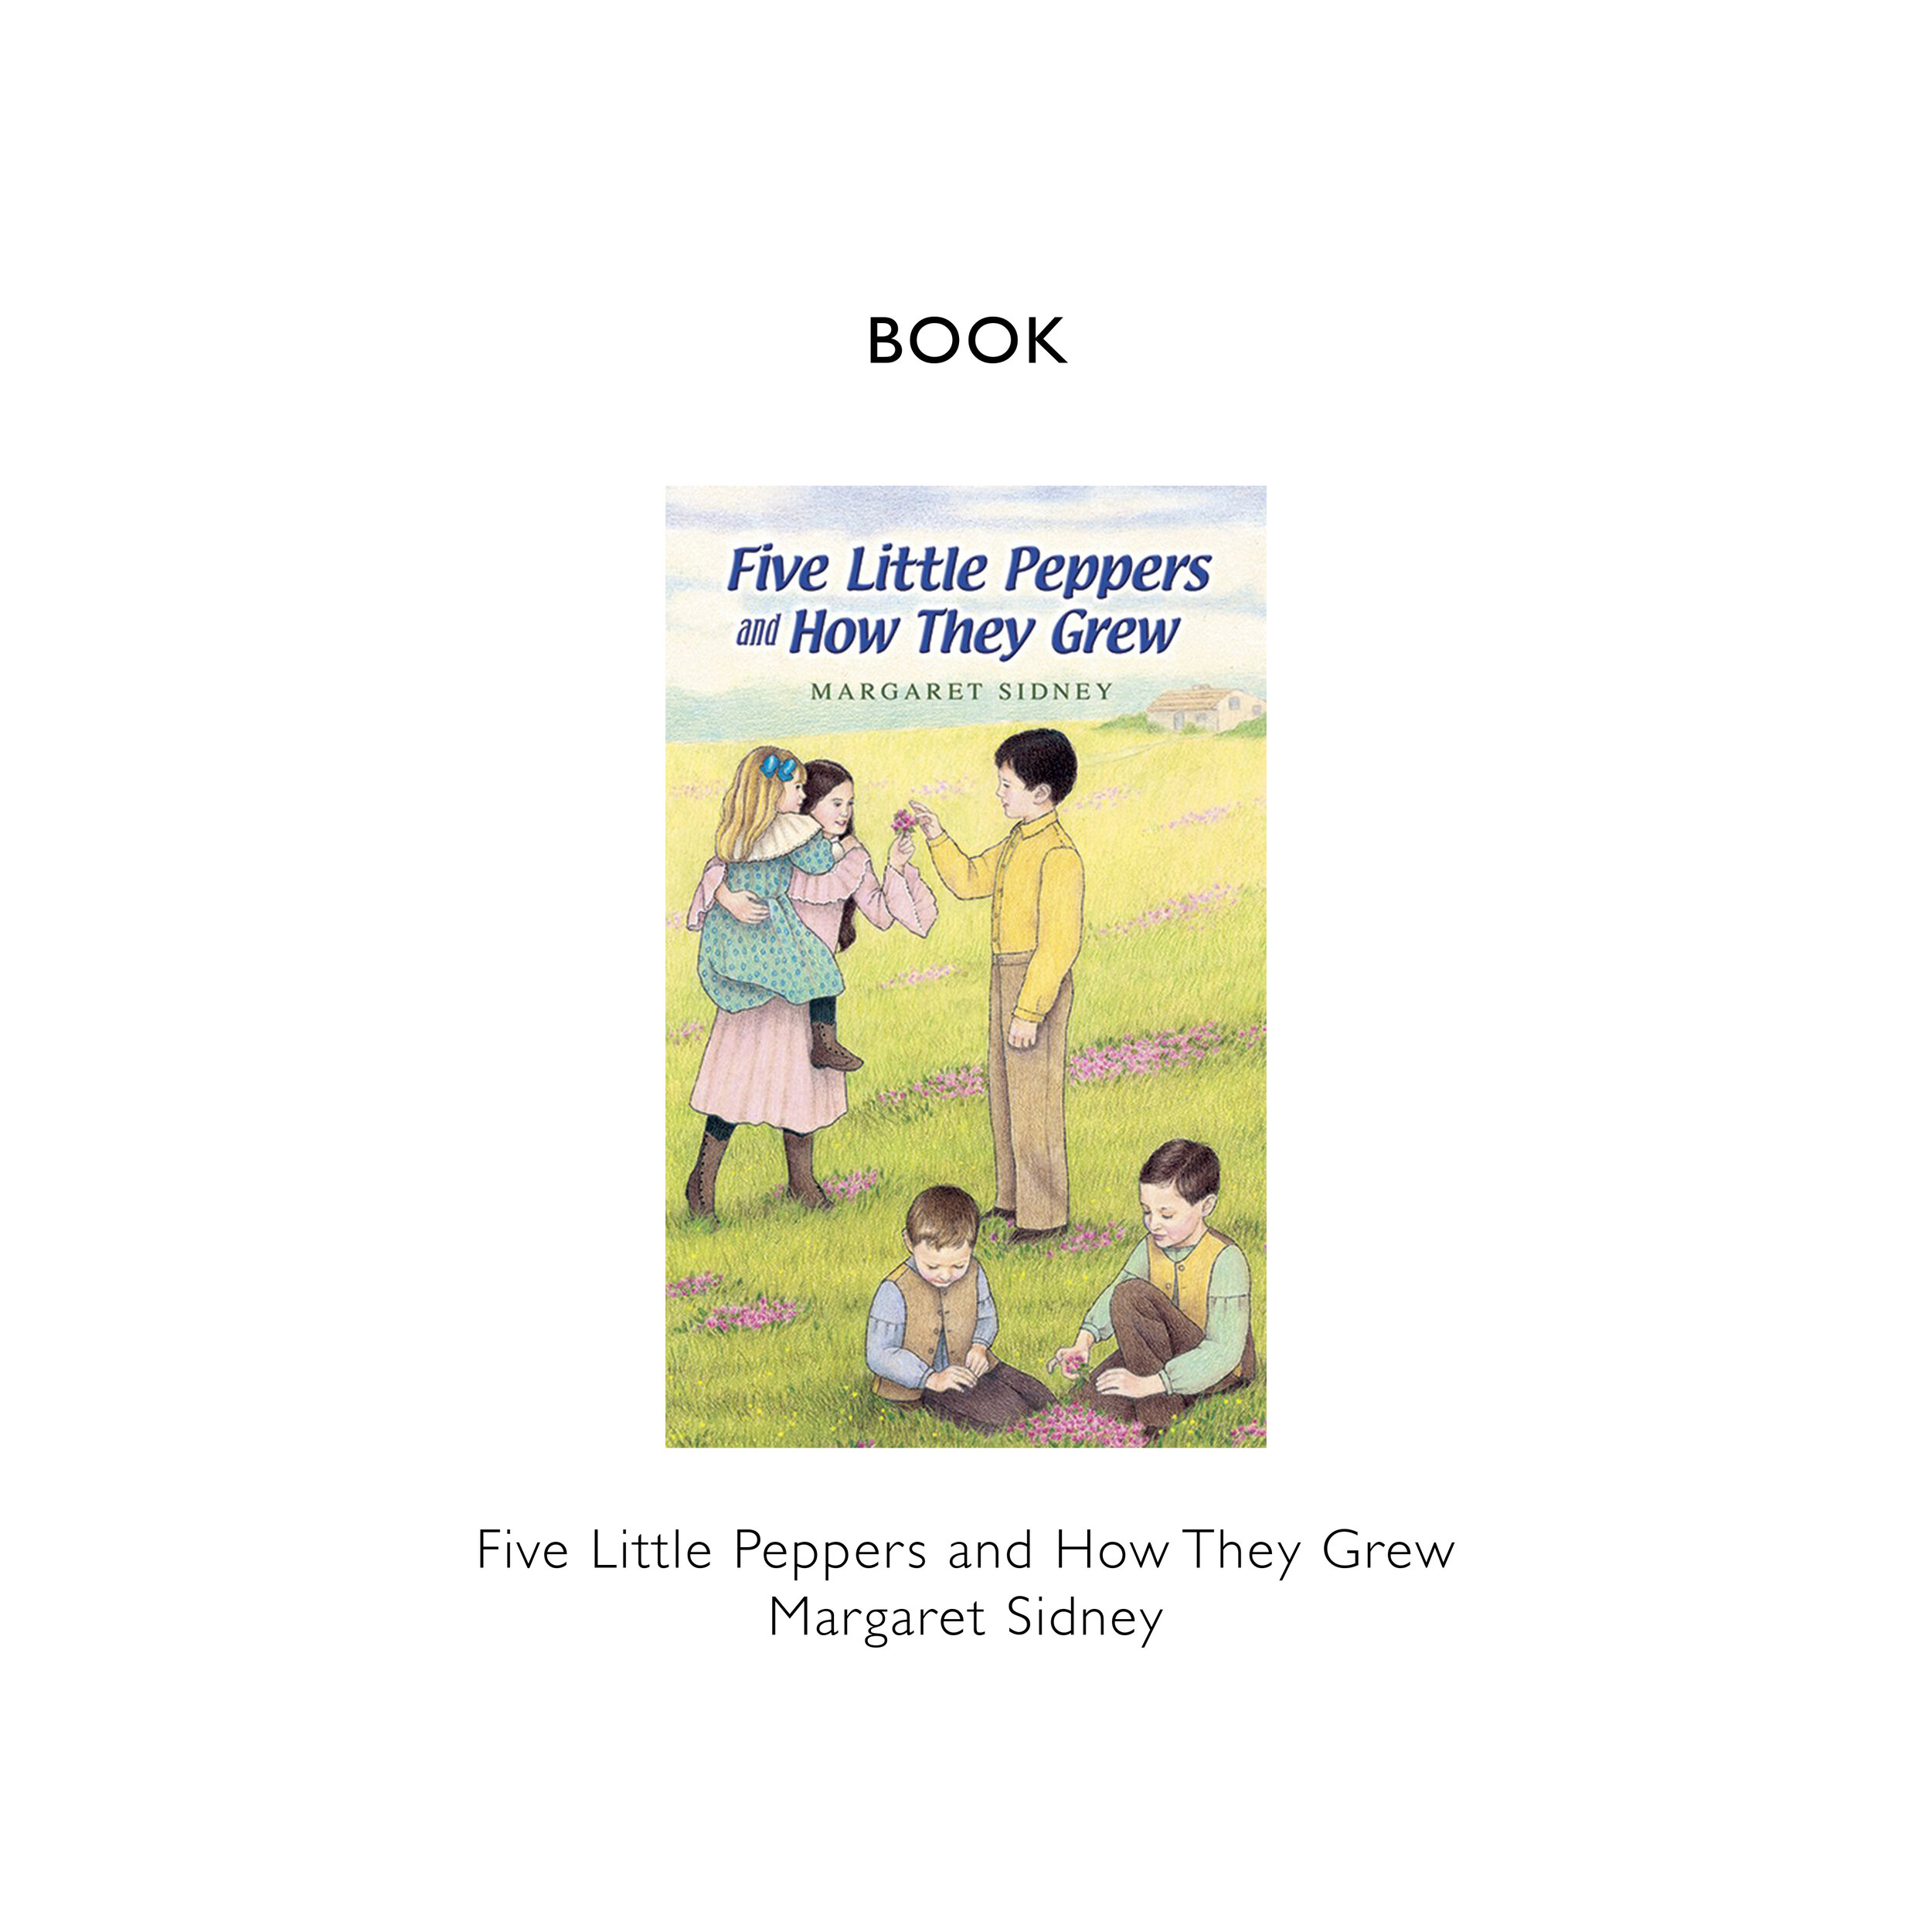 REFERENCE BLOG TEMPLATE Five Little Peppers and How They Grew Margaret Sidney copy.jpg